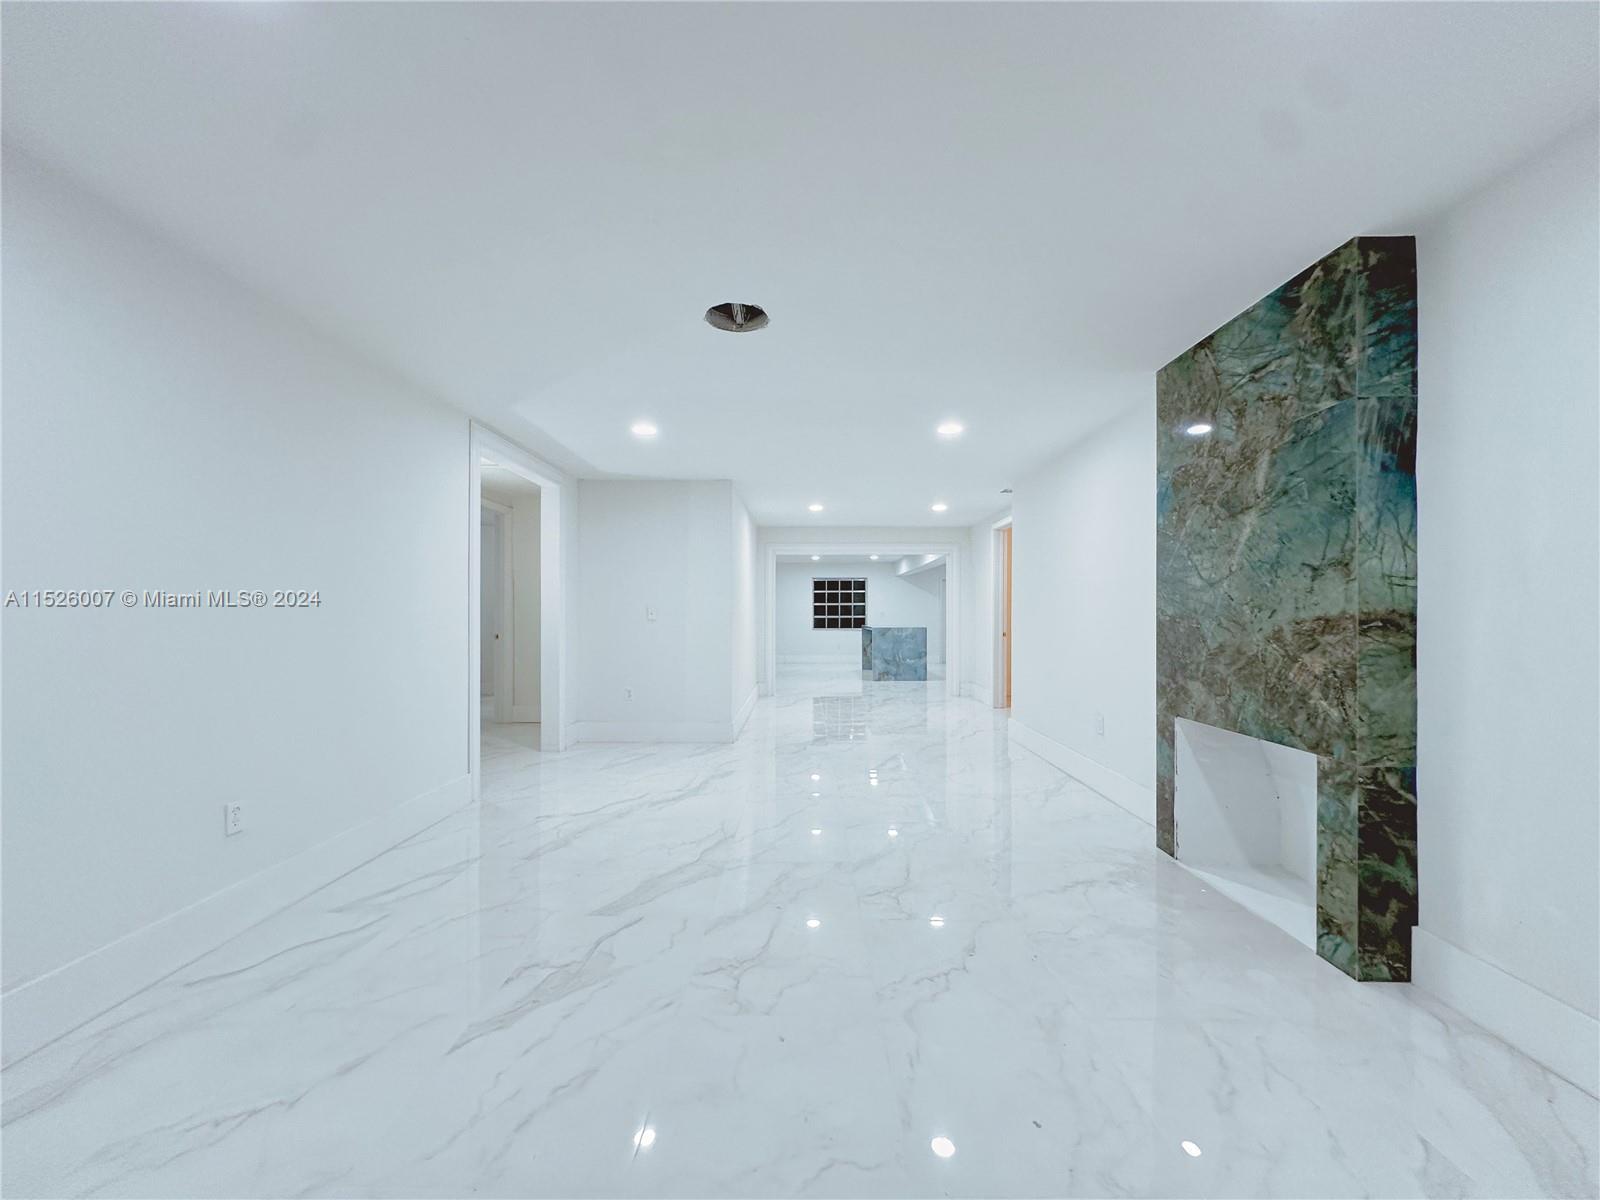 Photo 1 of Address Not Disclosed, Coral Gables, Florida, $2,225,000, Web #: 11526007